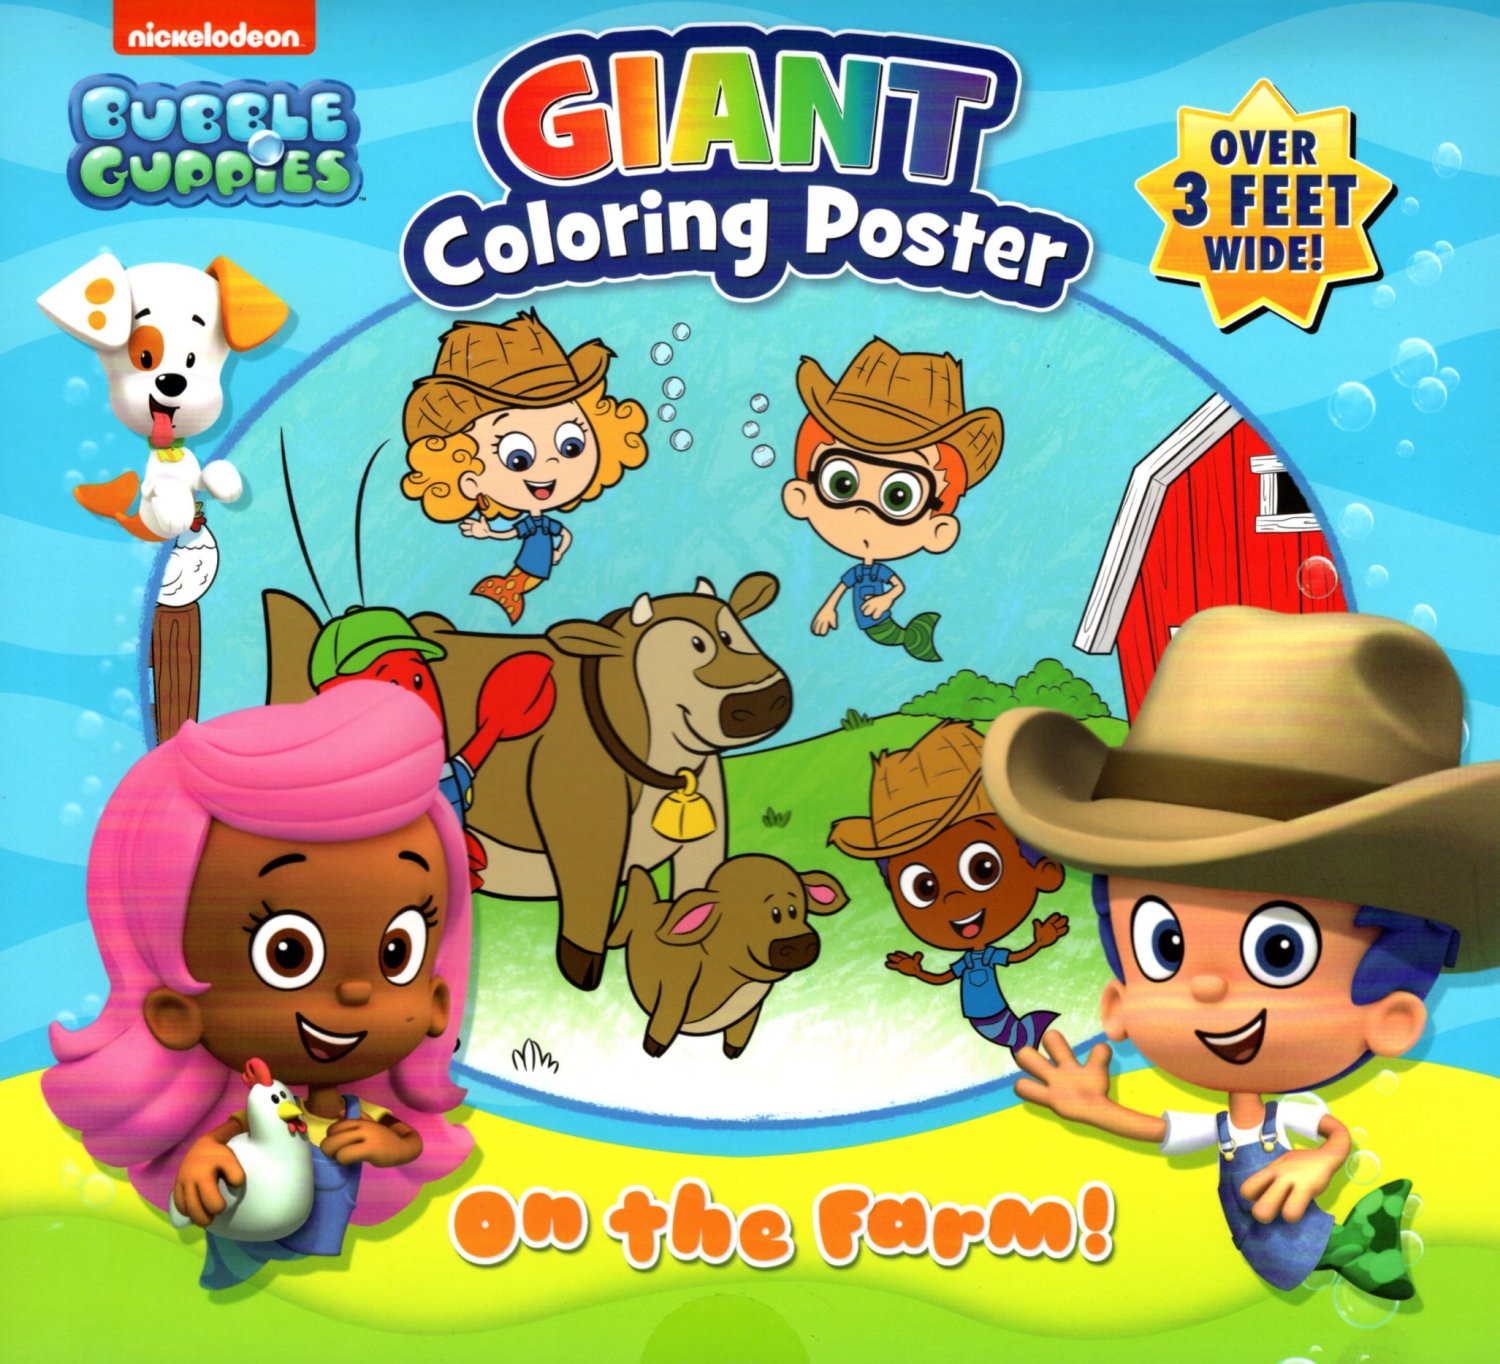 Nickelodeon Bubble Guppies - Giant Coloring Poster - On the Farm! - over 3 Feet Wide